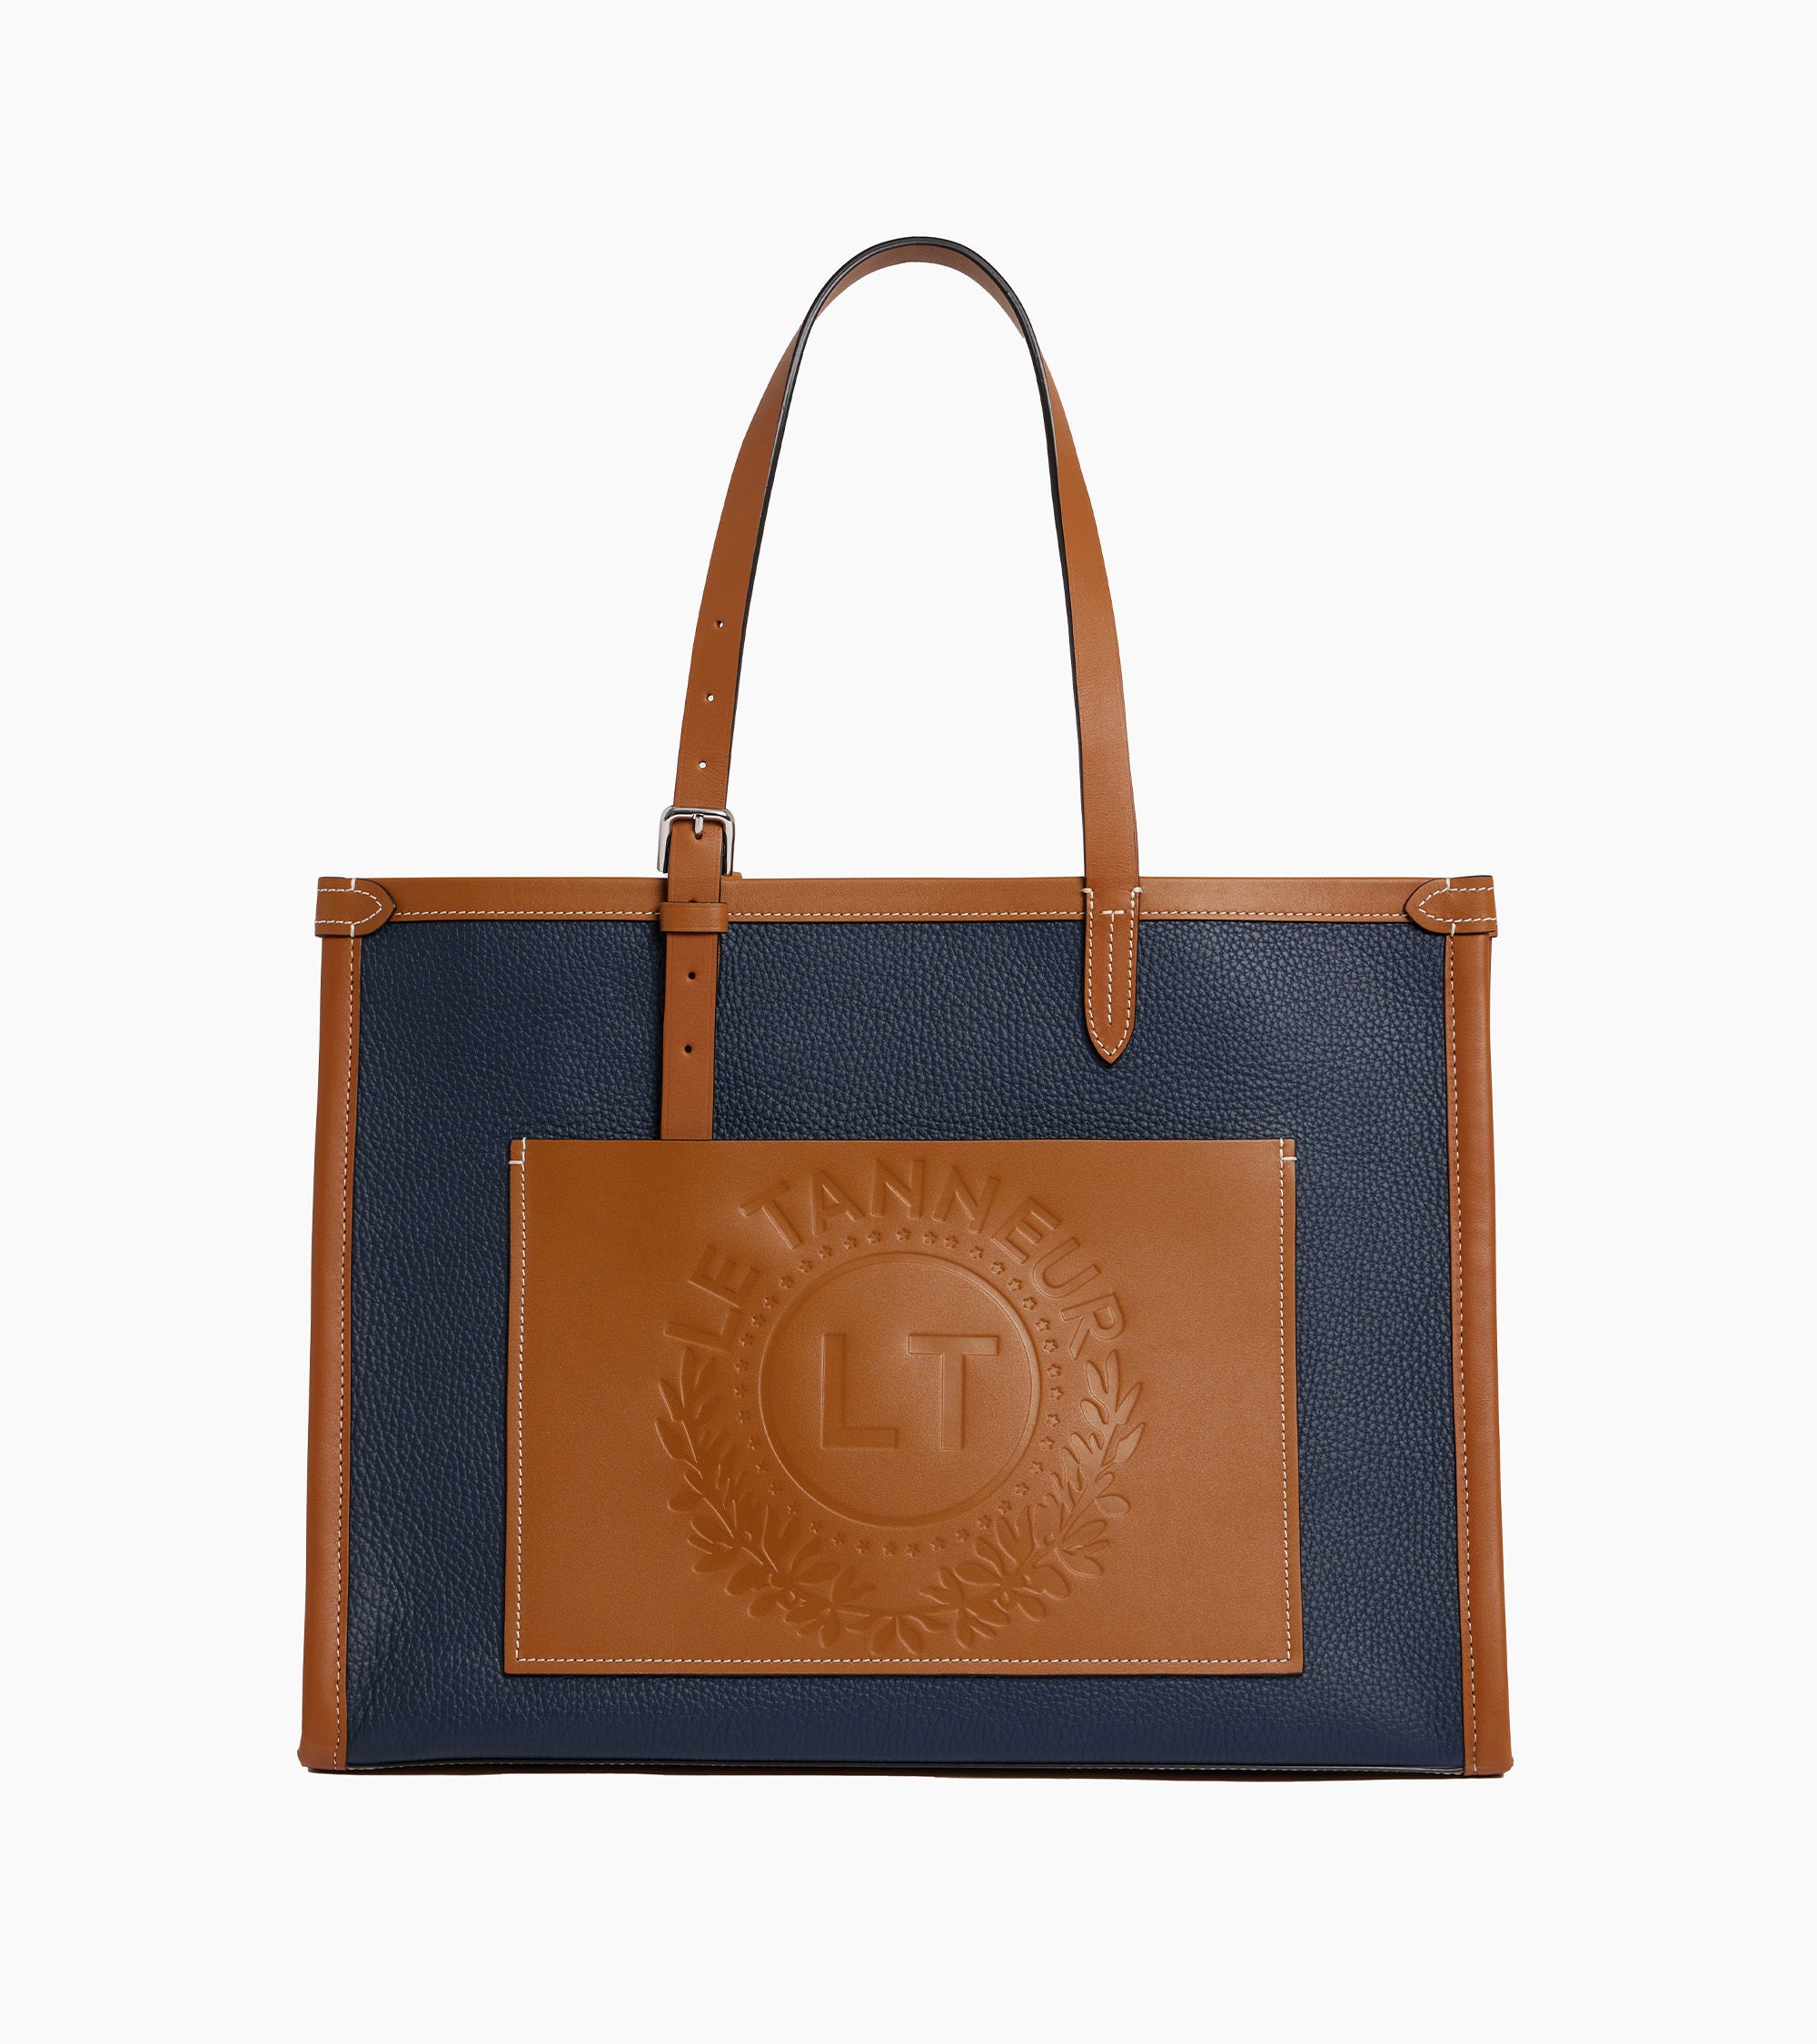 Le 125 large grained leather tote bag